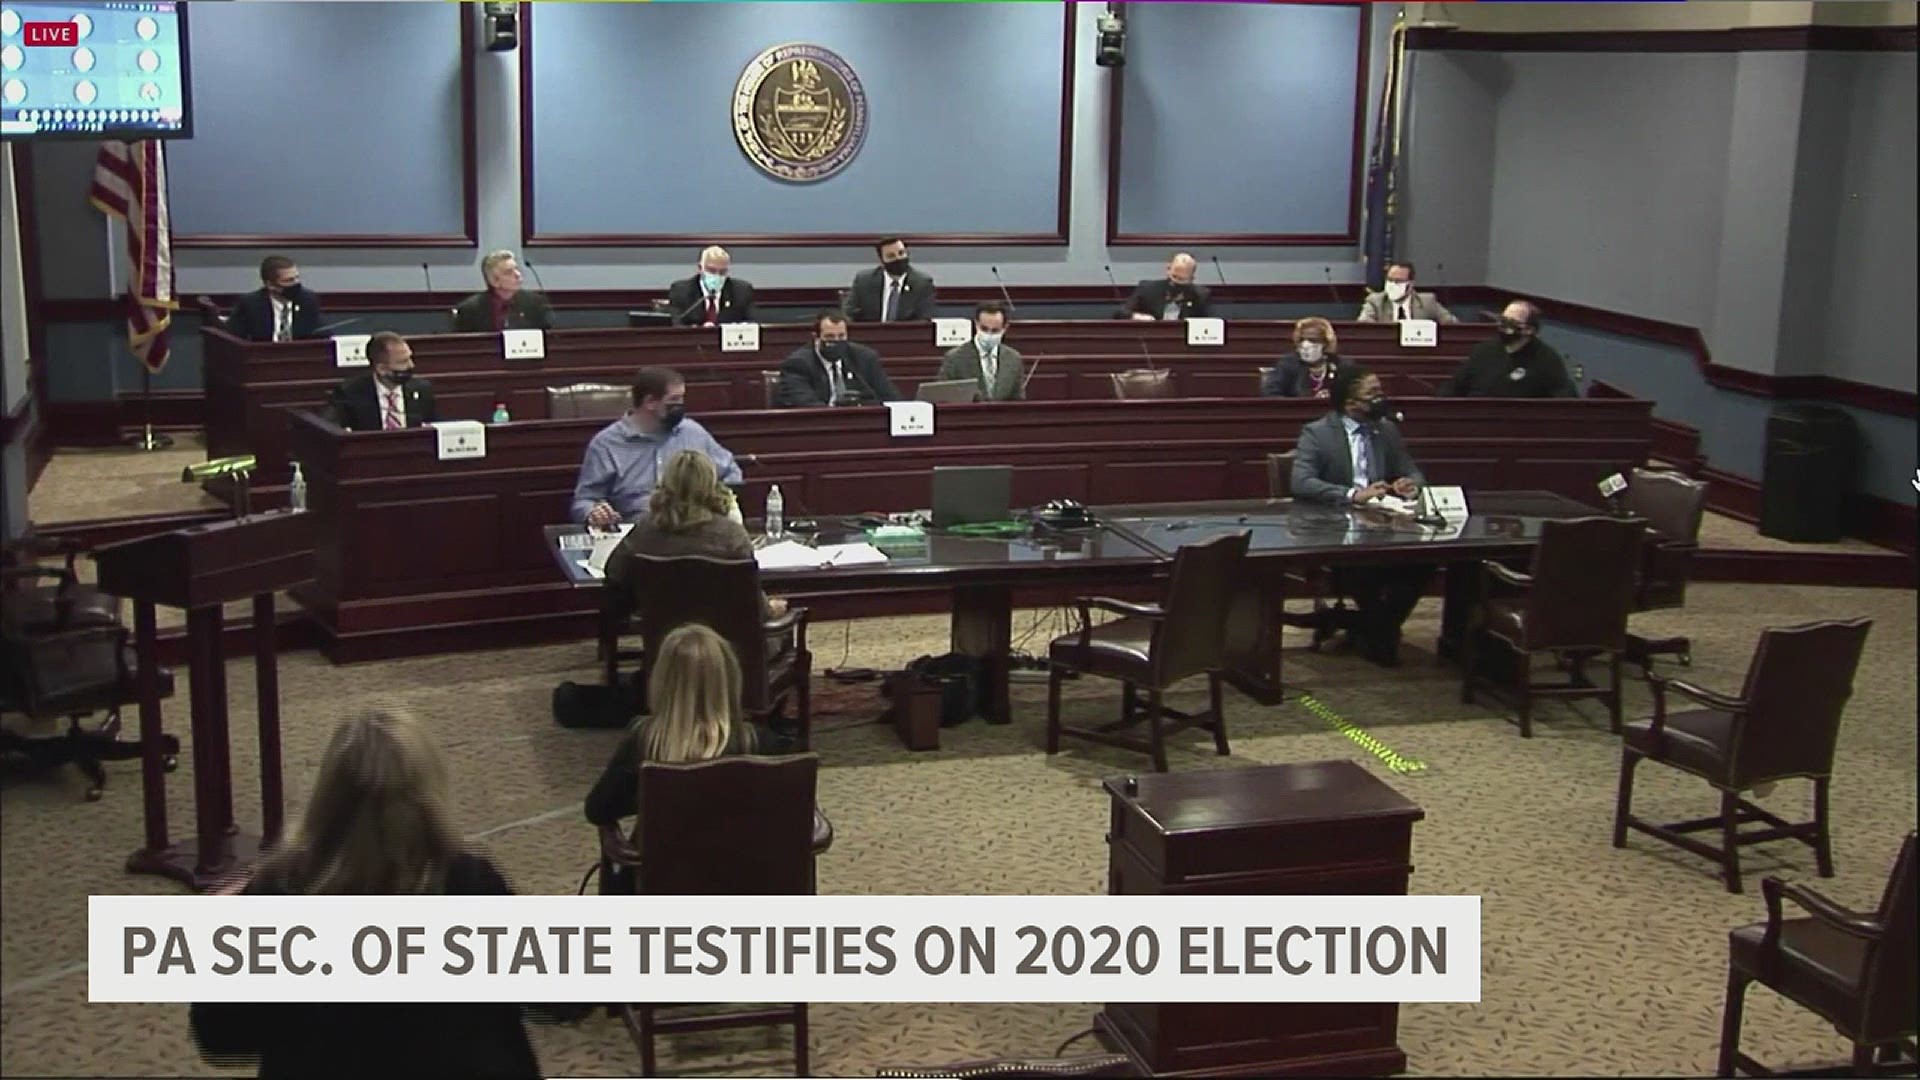 Following a tumultuous 2020 election, the Pennsylvania House began an in-depth evaluation of how to improve the state’s election process.